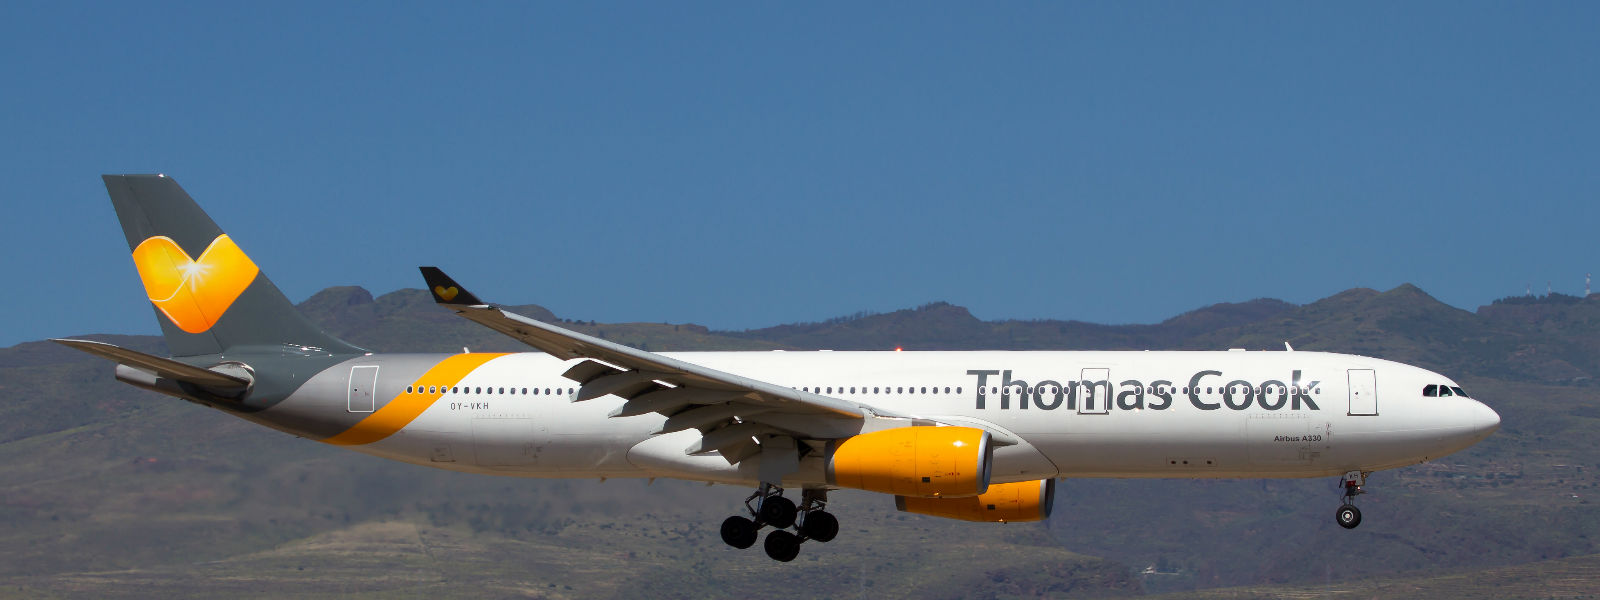 Thomas Cook collapse: UK aviation authority launches ‘huge’ repatriation effort